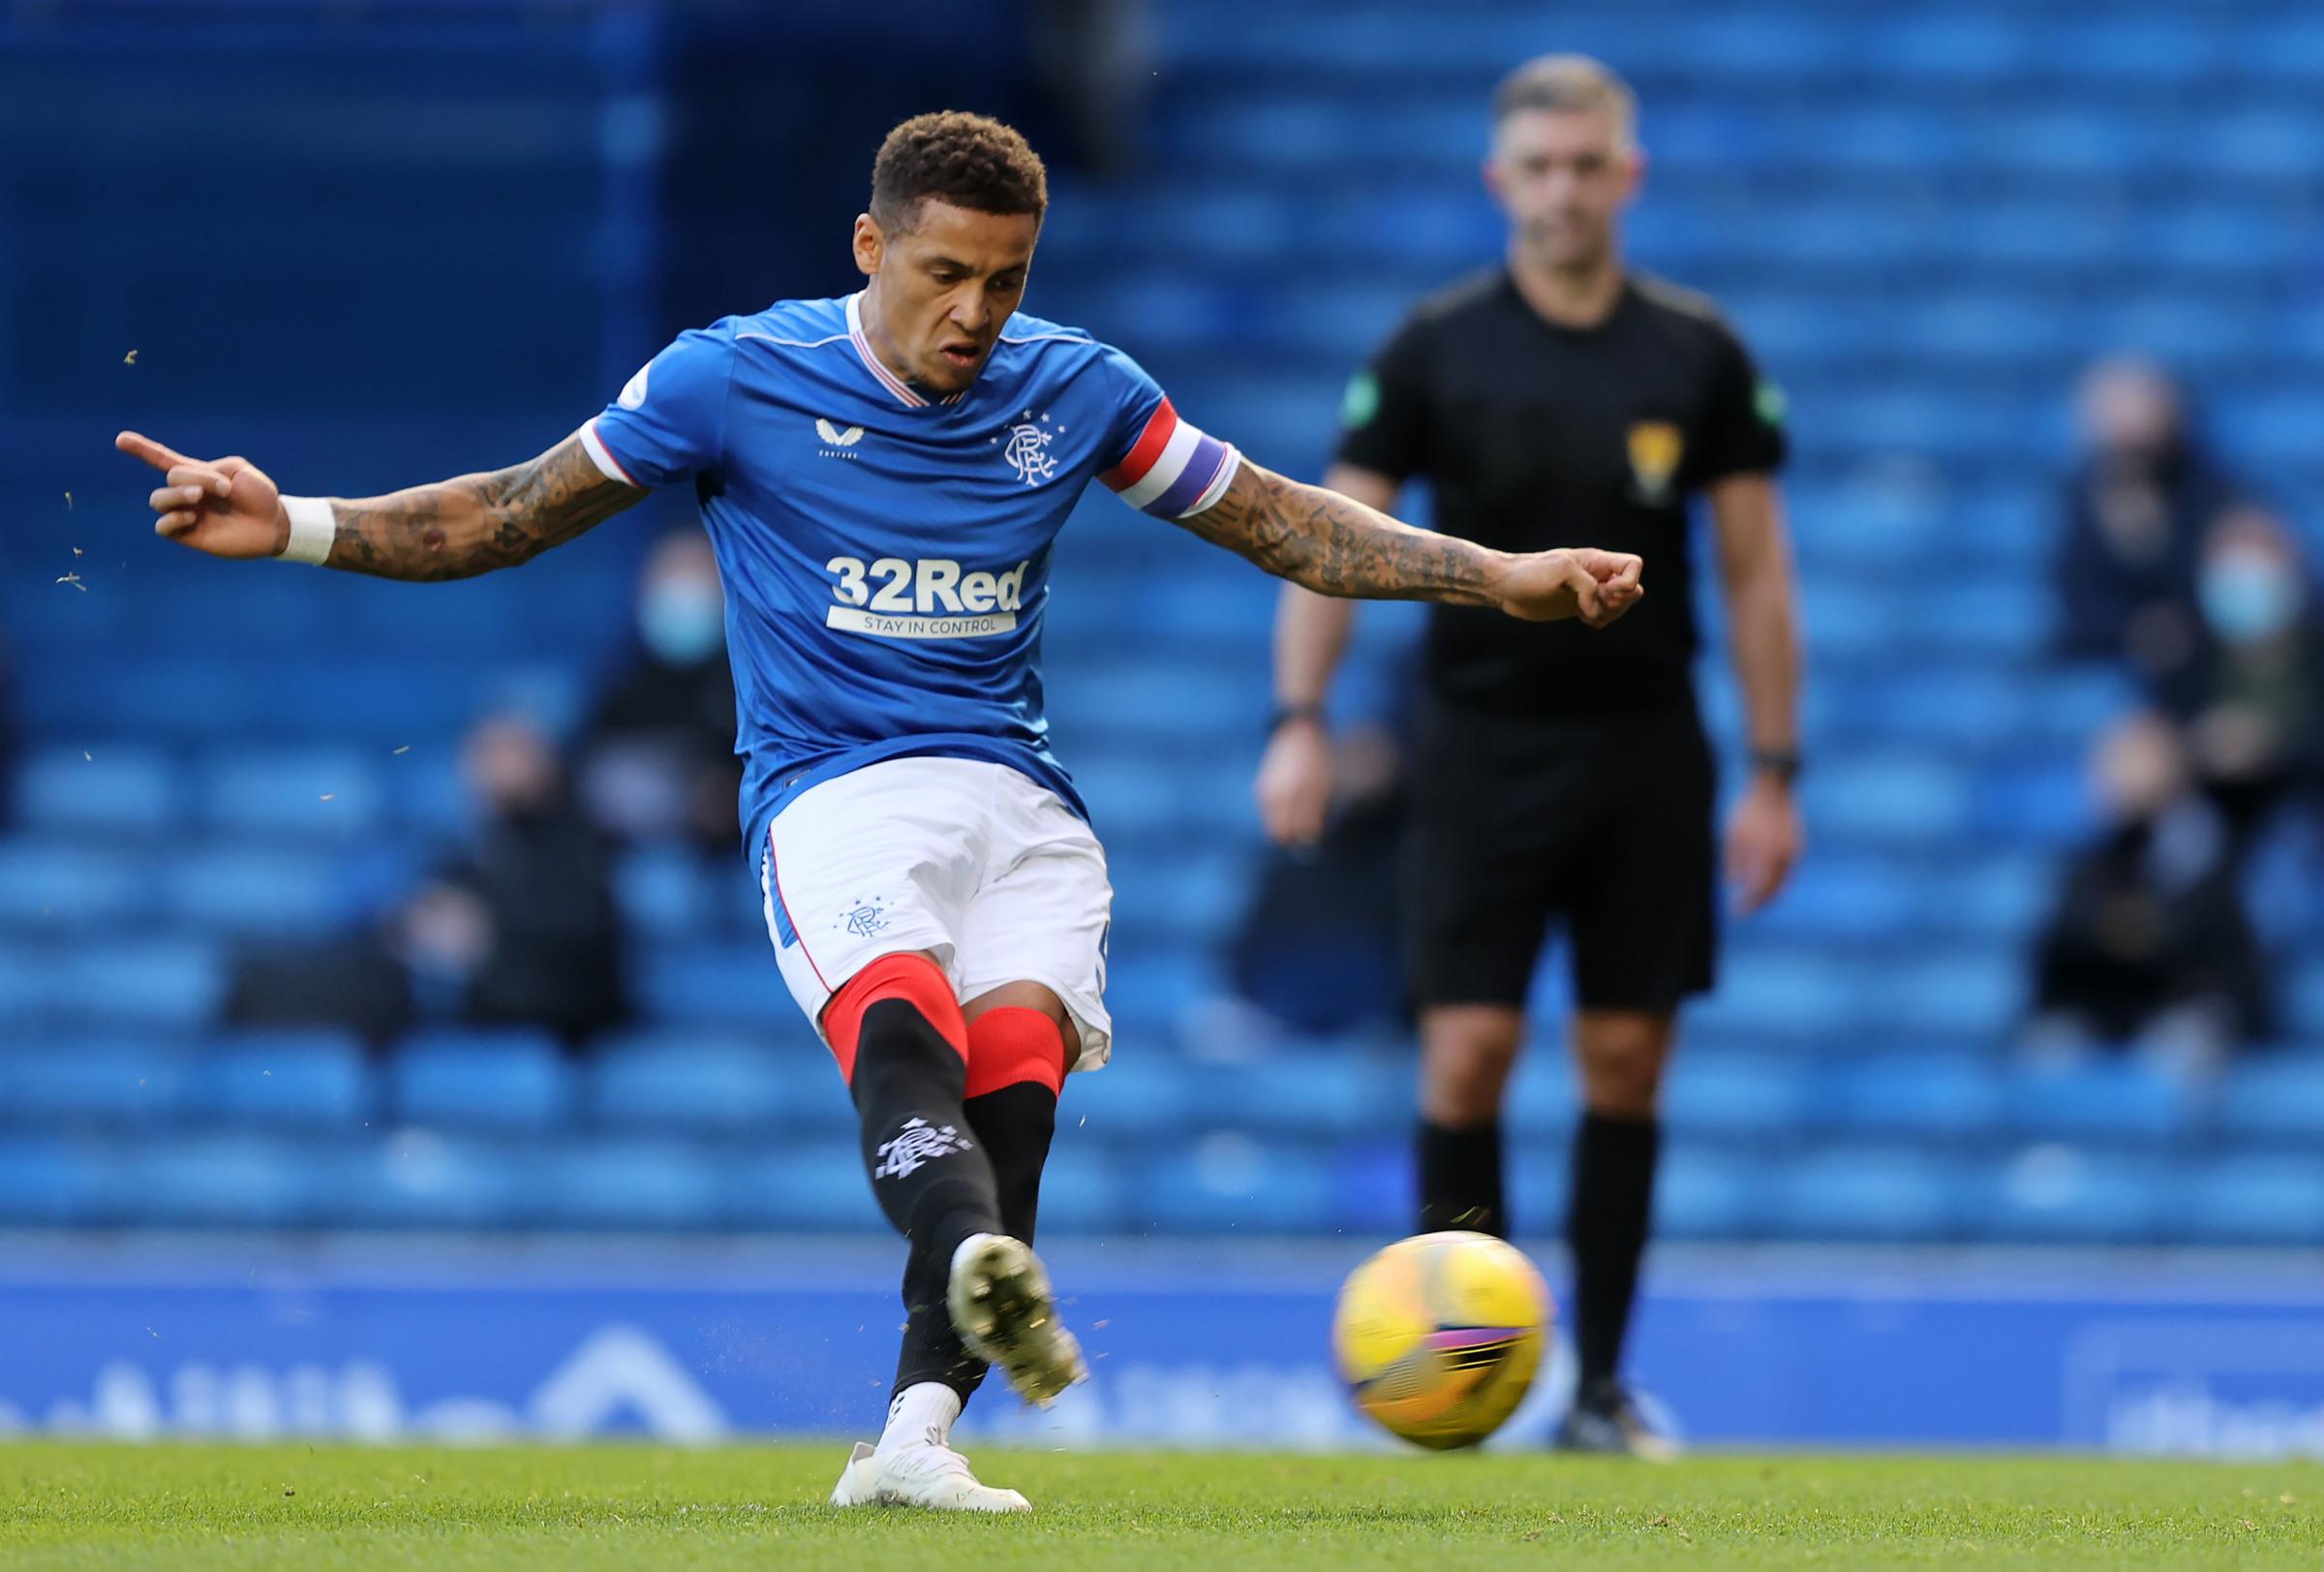 Rangers 2-0 Ross County As it happened: Tavernier and Barker send Rangers top